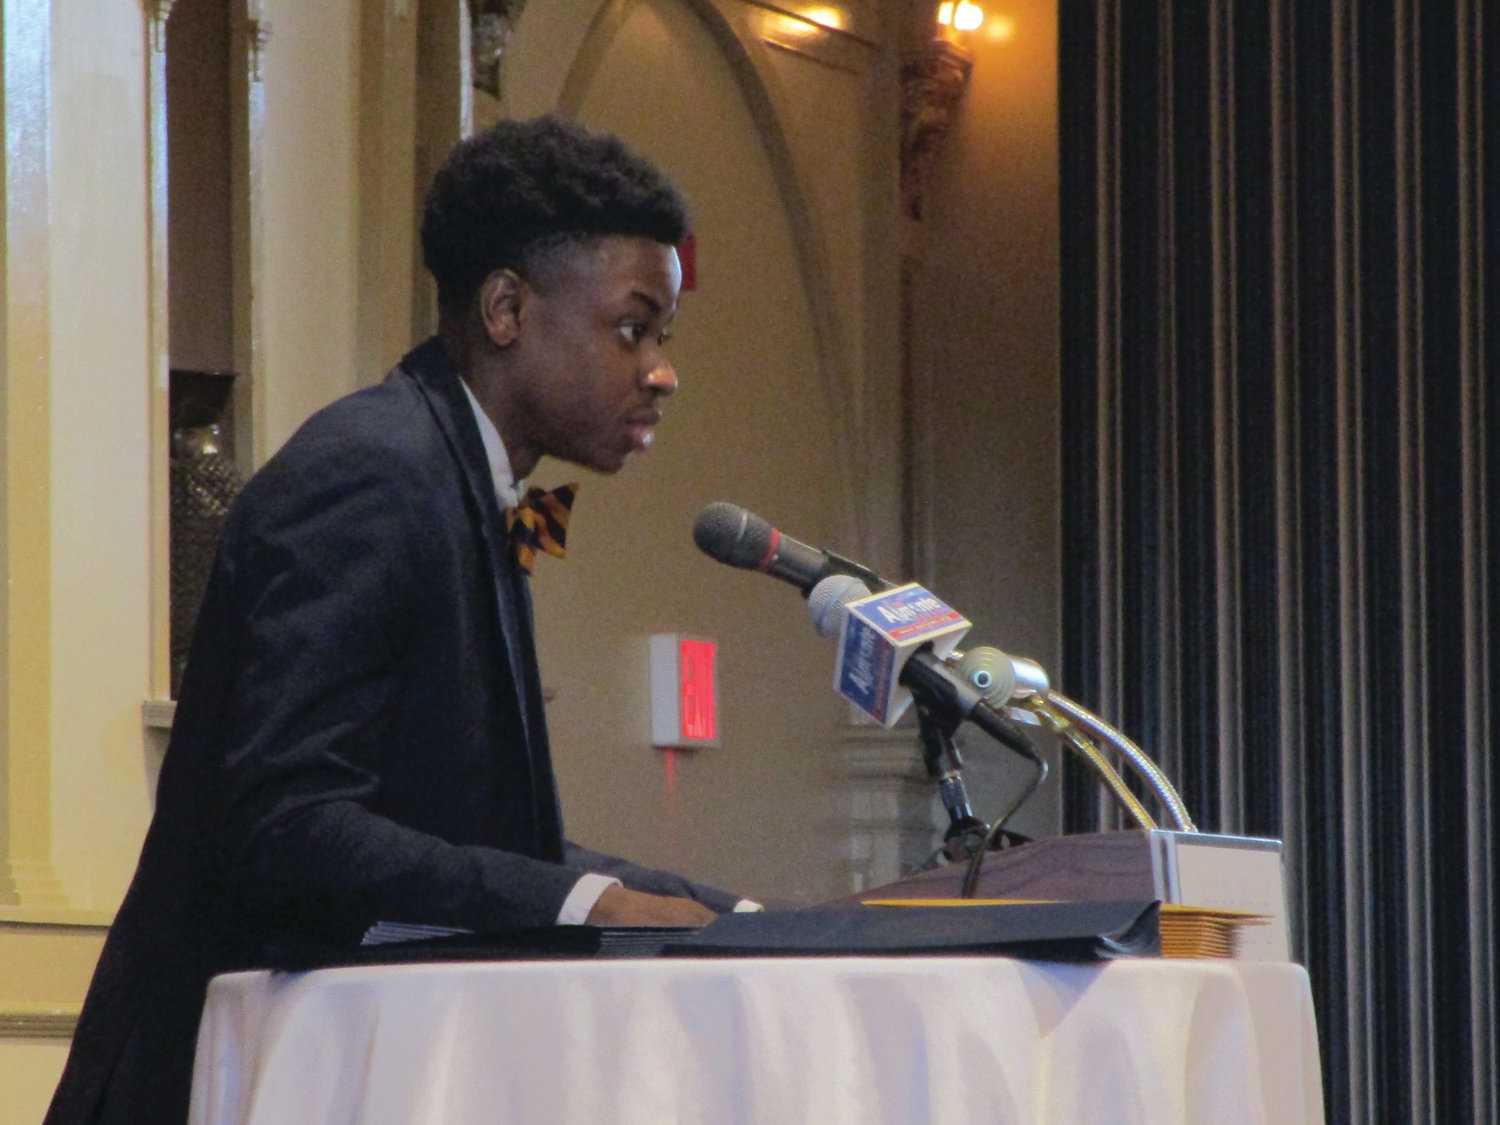 HONORED GUEST: Scholarship recipient John Quainoo shares a portion of his essay during the breakfast gathering at Rhodes on the Pawtuxet.